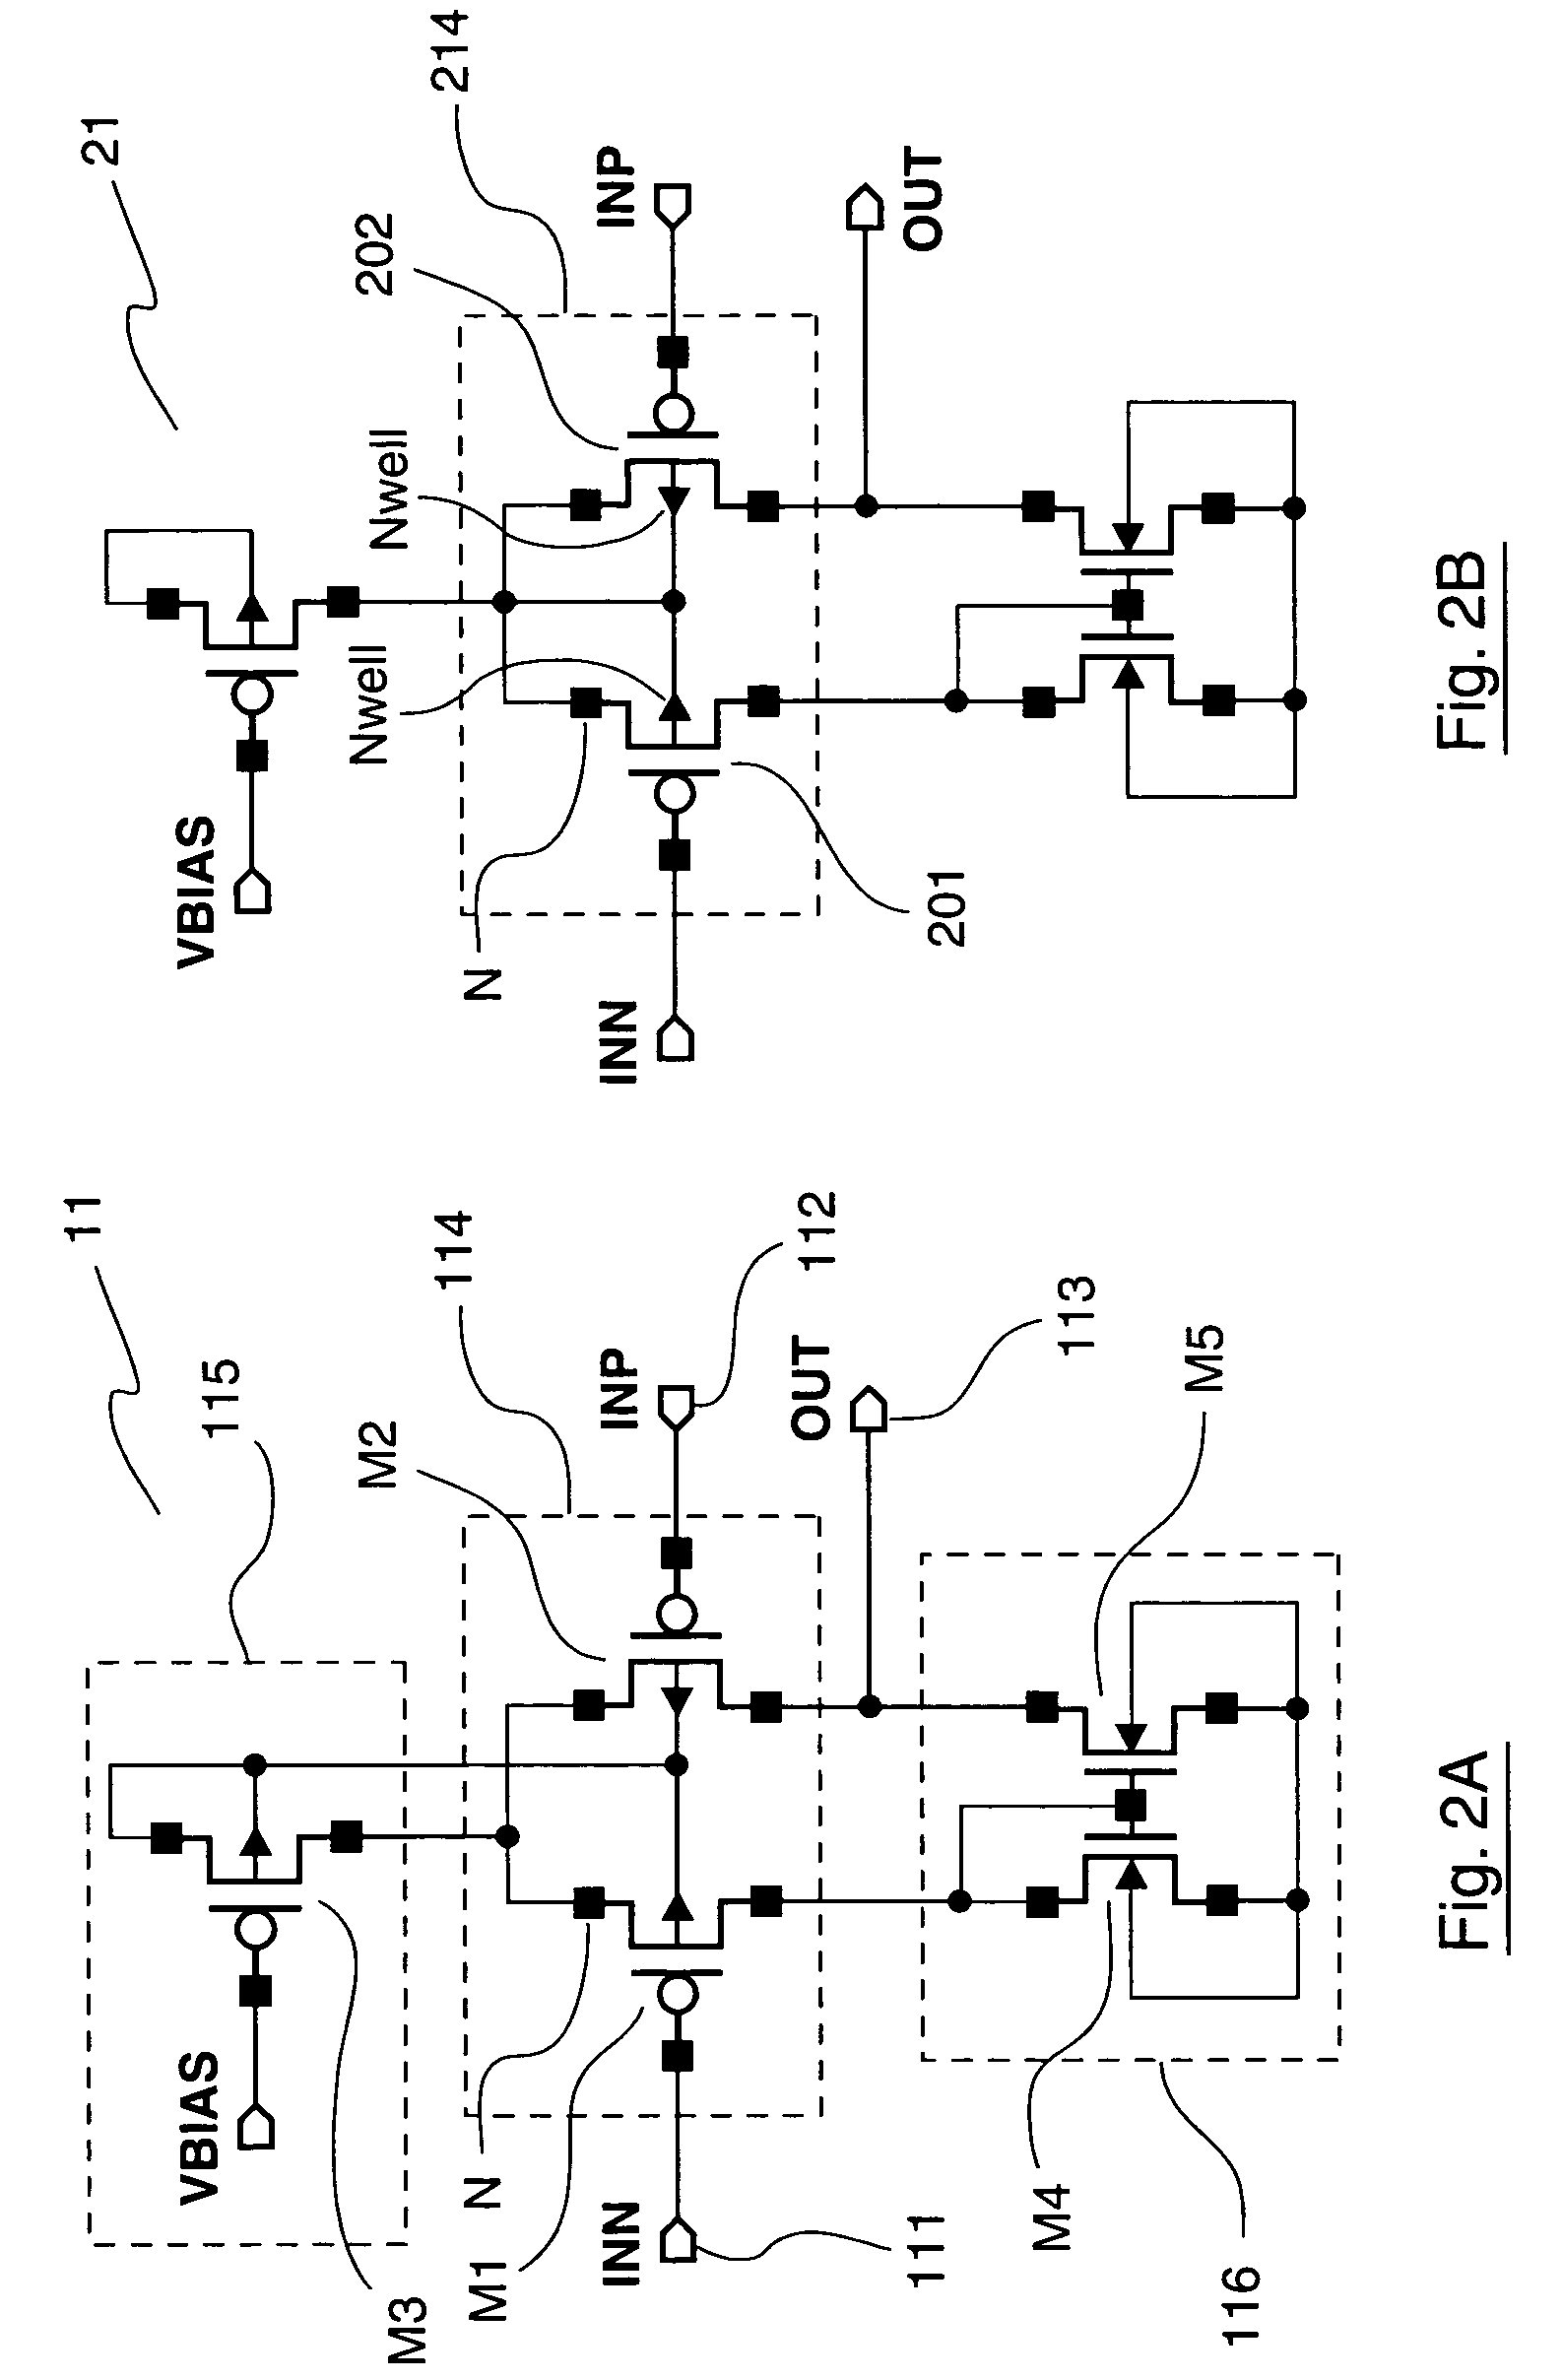 Electronic circuit including at least one first and one second differential pair with the transistors sharing one and the same well